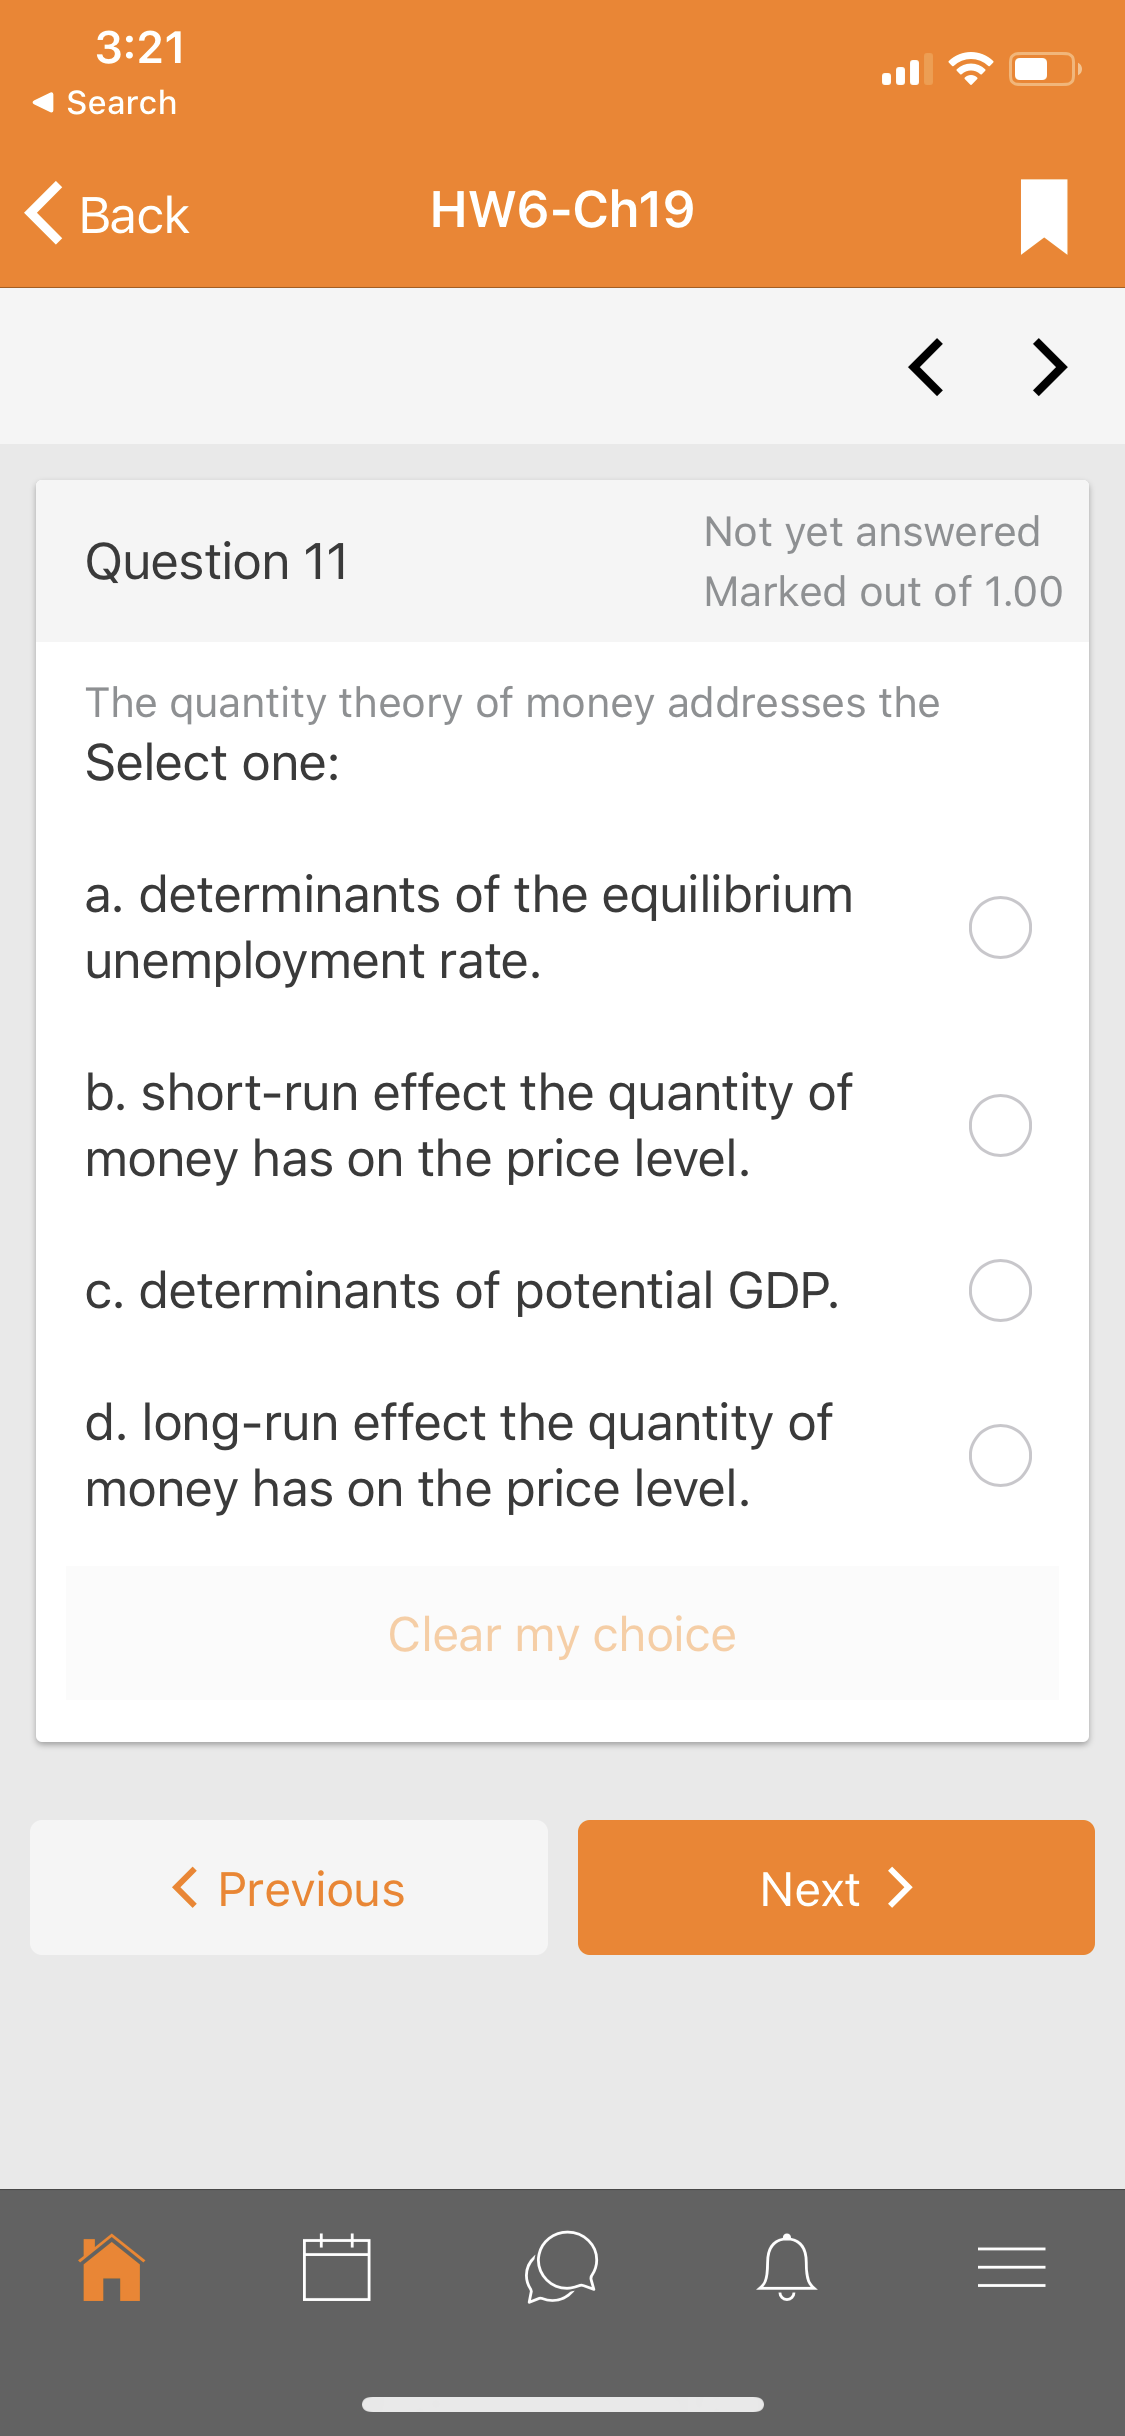 The quantity theory of money addresses the
Select one:
a. determinants of the equilibrium
unemployment rate.
b. short-run effect the quantity of
money has on the price level.
c. determinants of potential GDP.
d. Iong-run effect the quantity of
money has on the price level.
